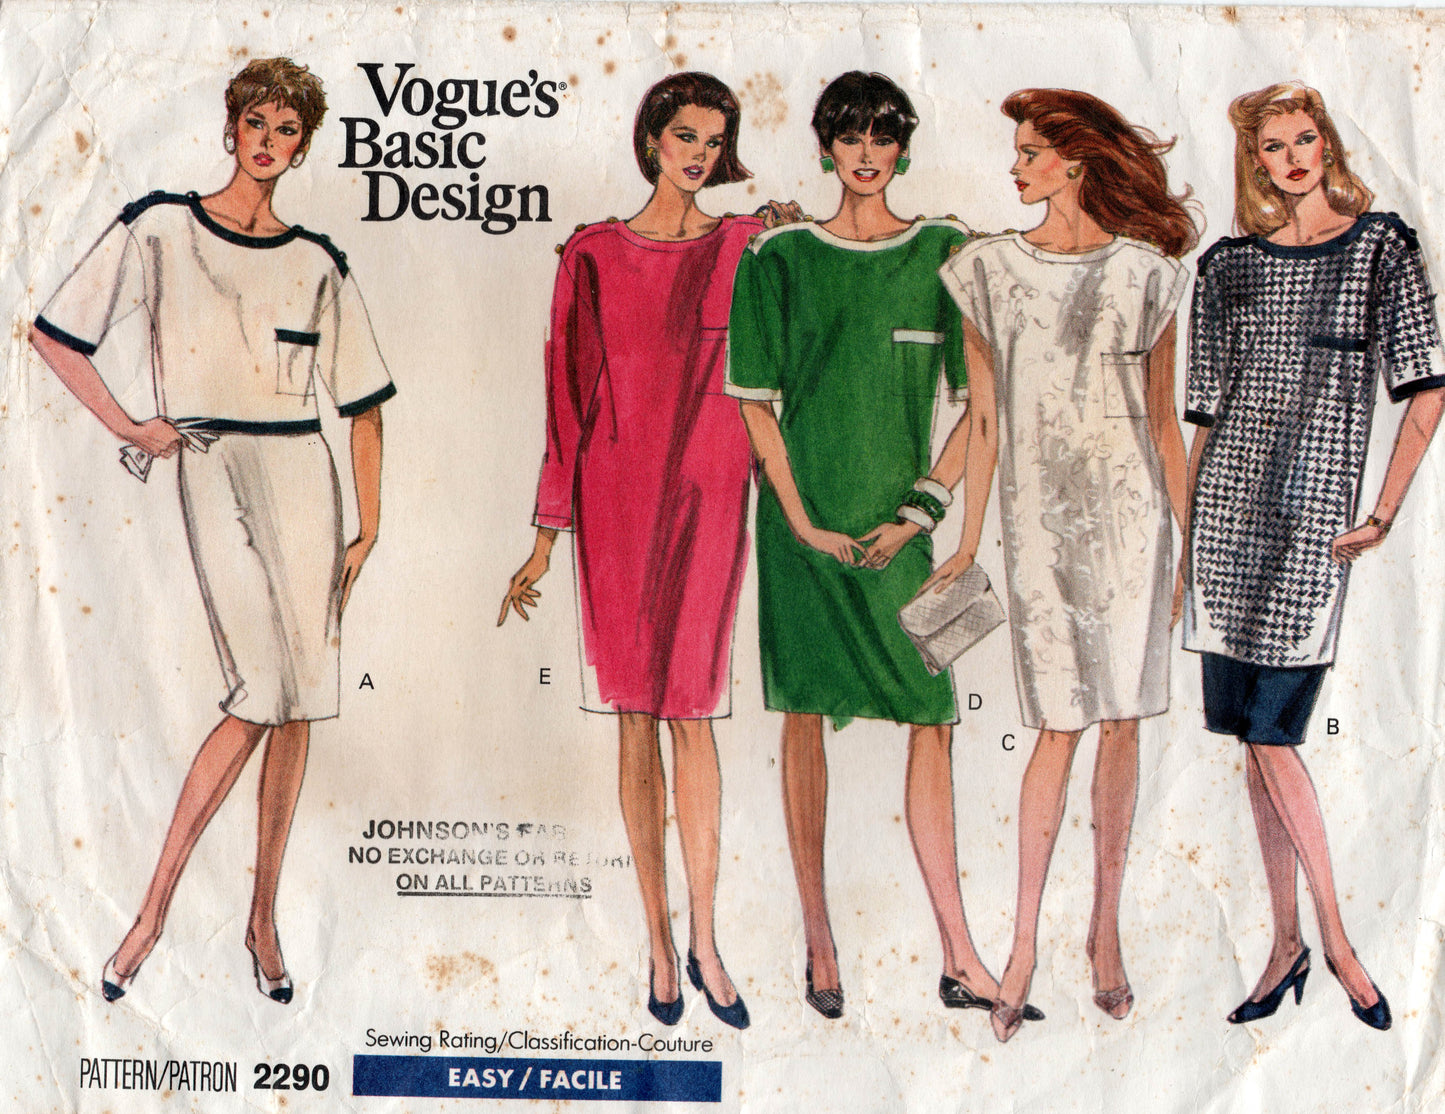 Vogue Basic Design 2290 Womens Contrast Edged Dress Top Tunic & Skirt 1980s Vintage Sewing Pattern Size 8 - 12